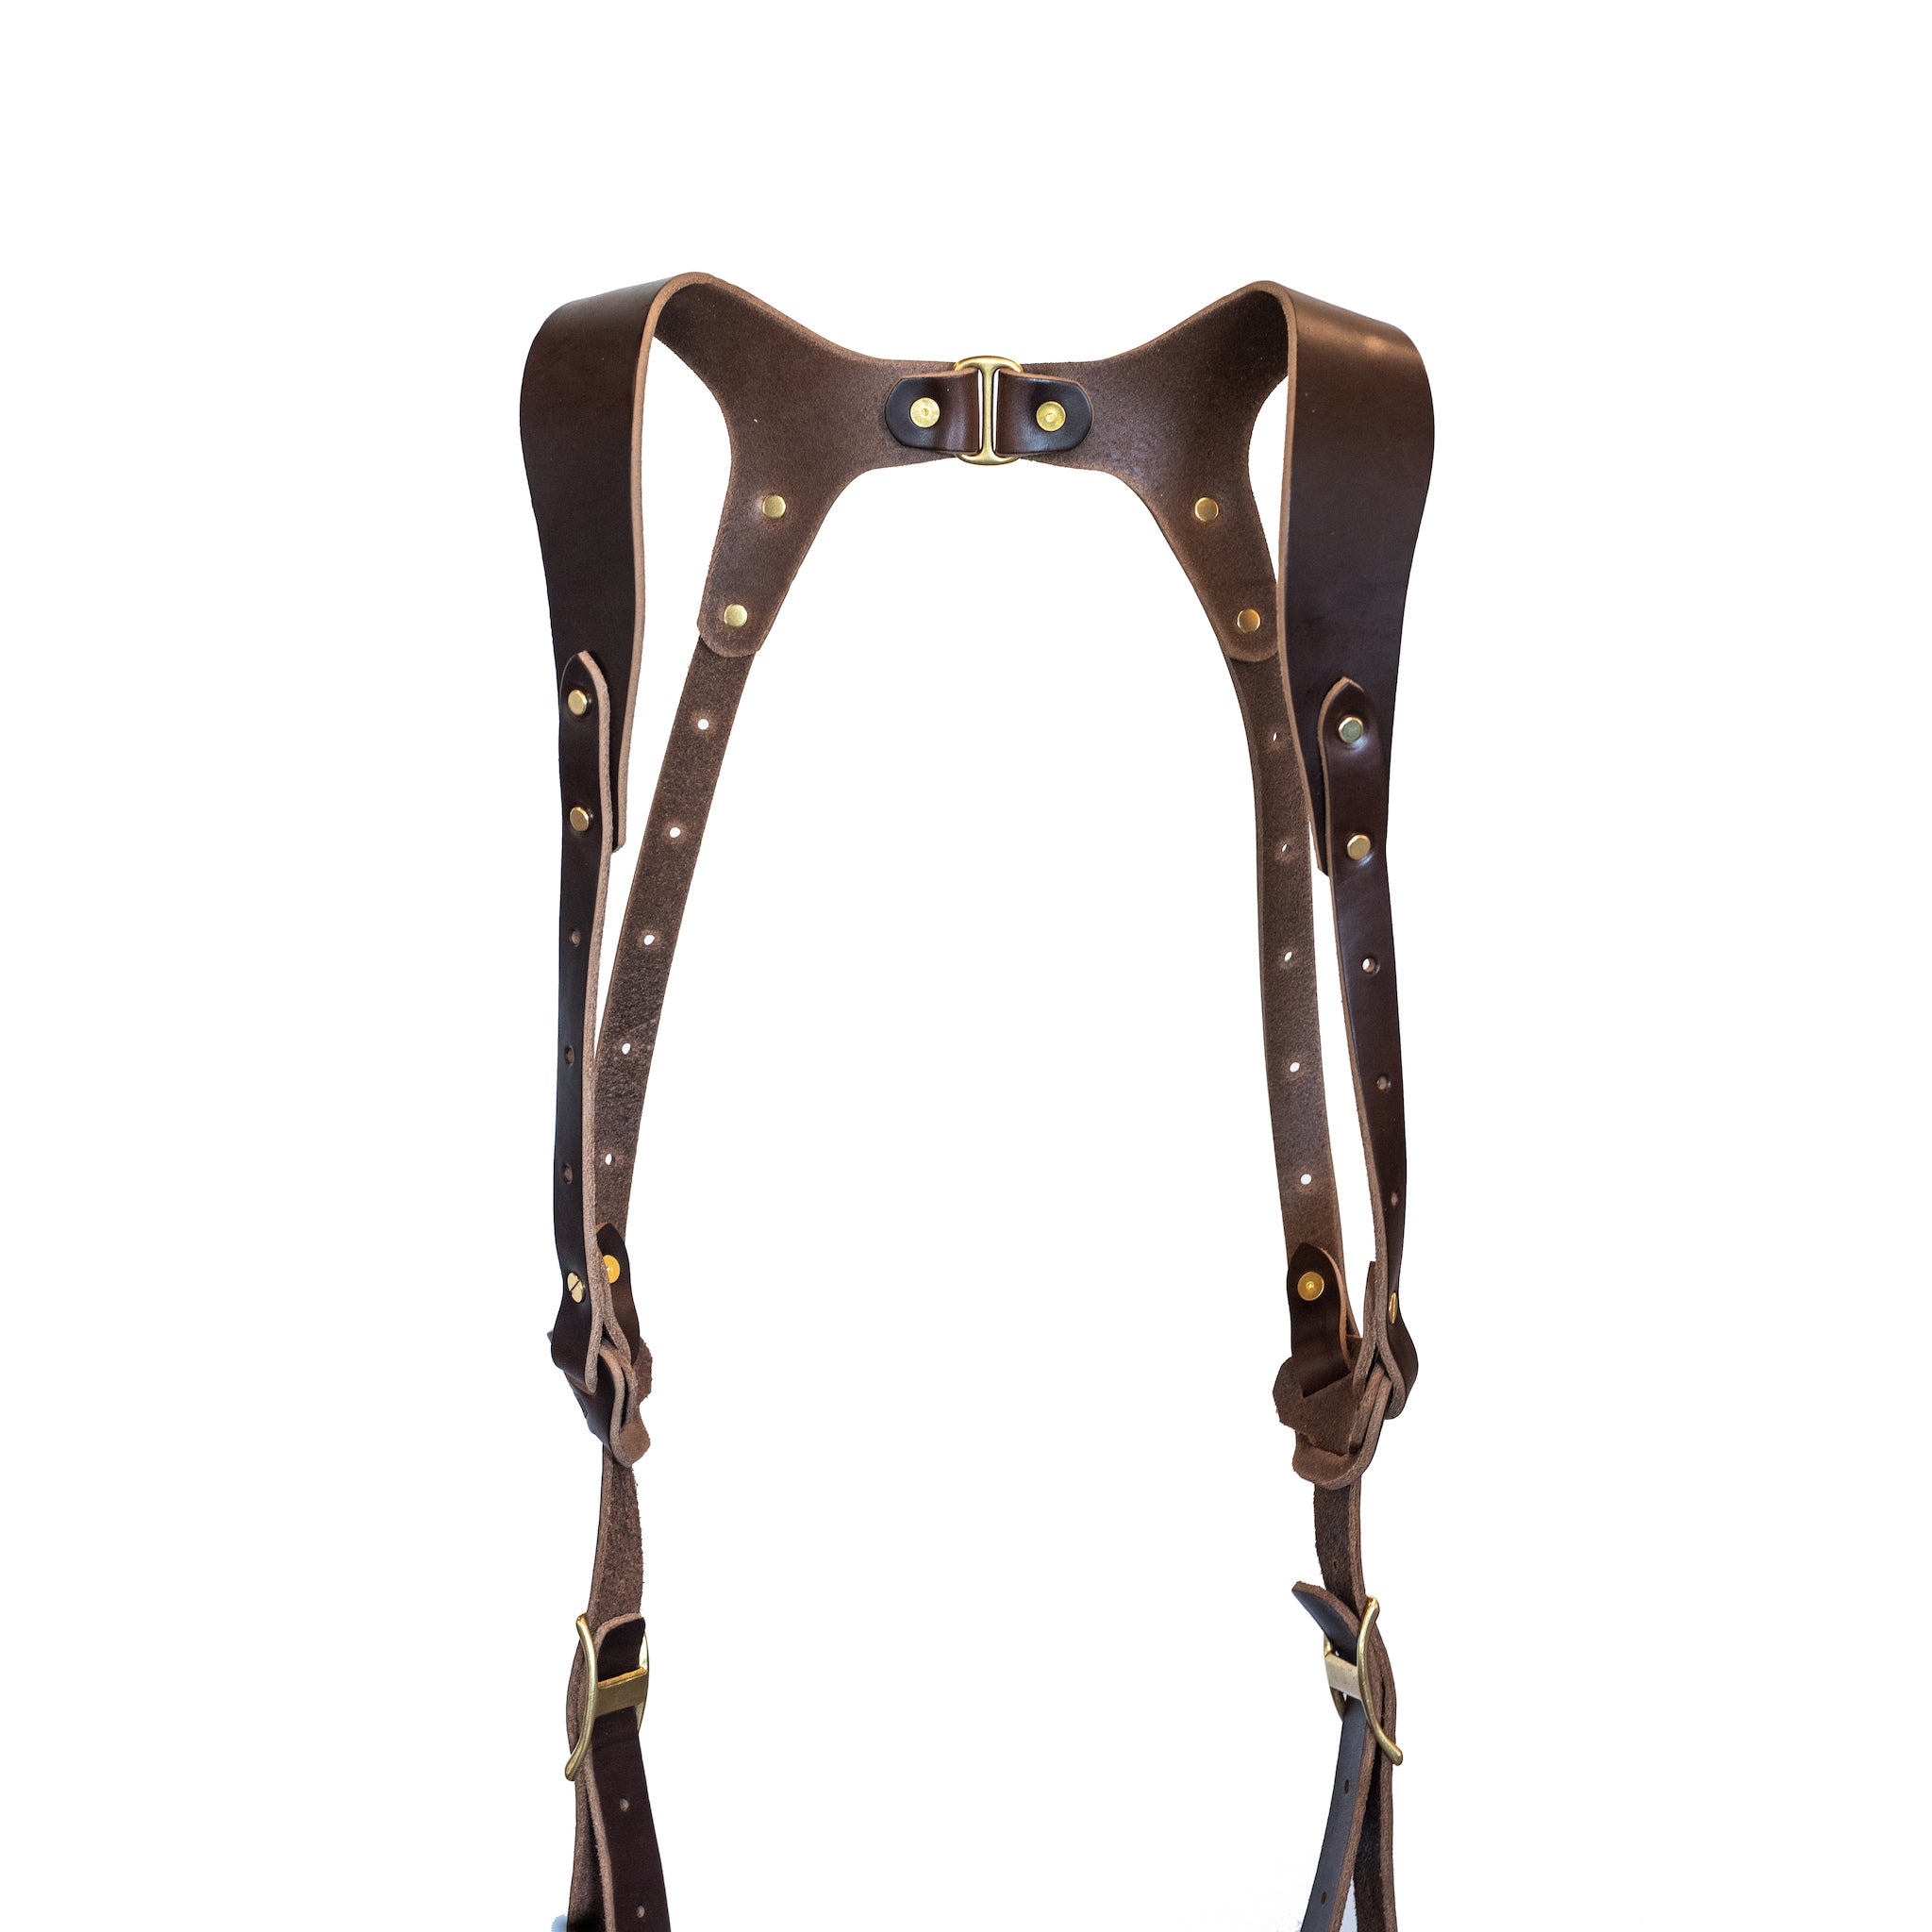 Dark Brown Leather Dual Camera Harness + Pro Package